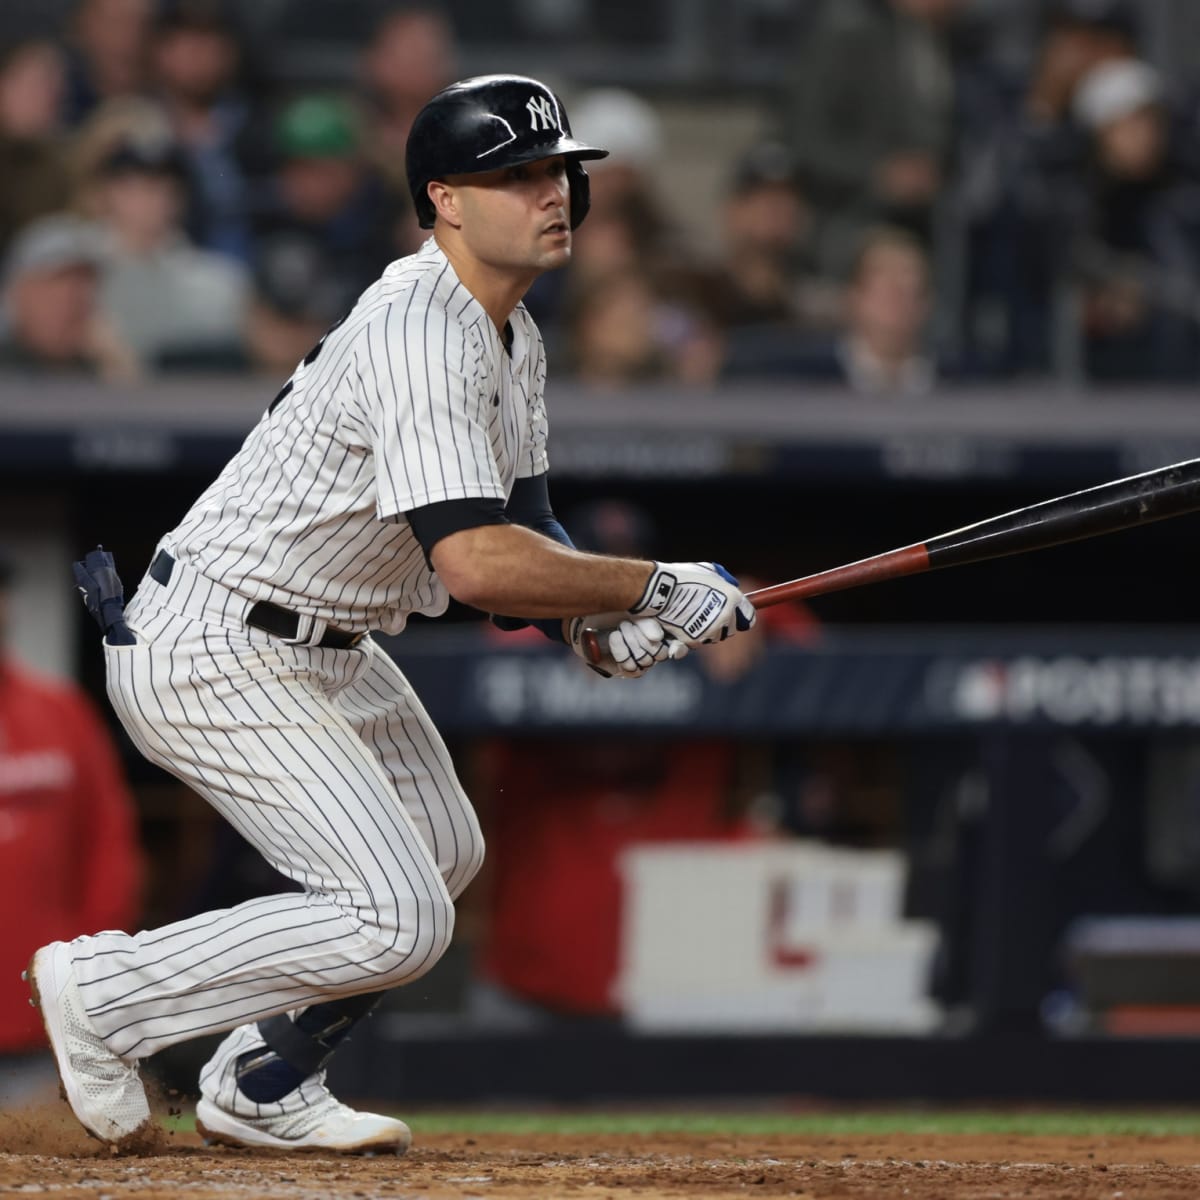 Isiah Kiner-Falefa's first center field start a success for Yankees